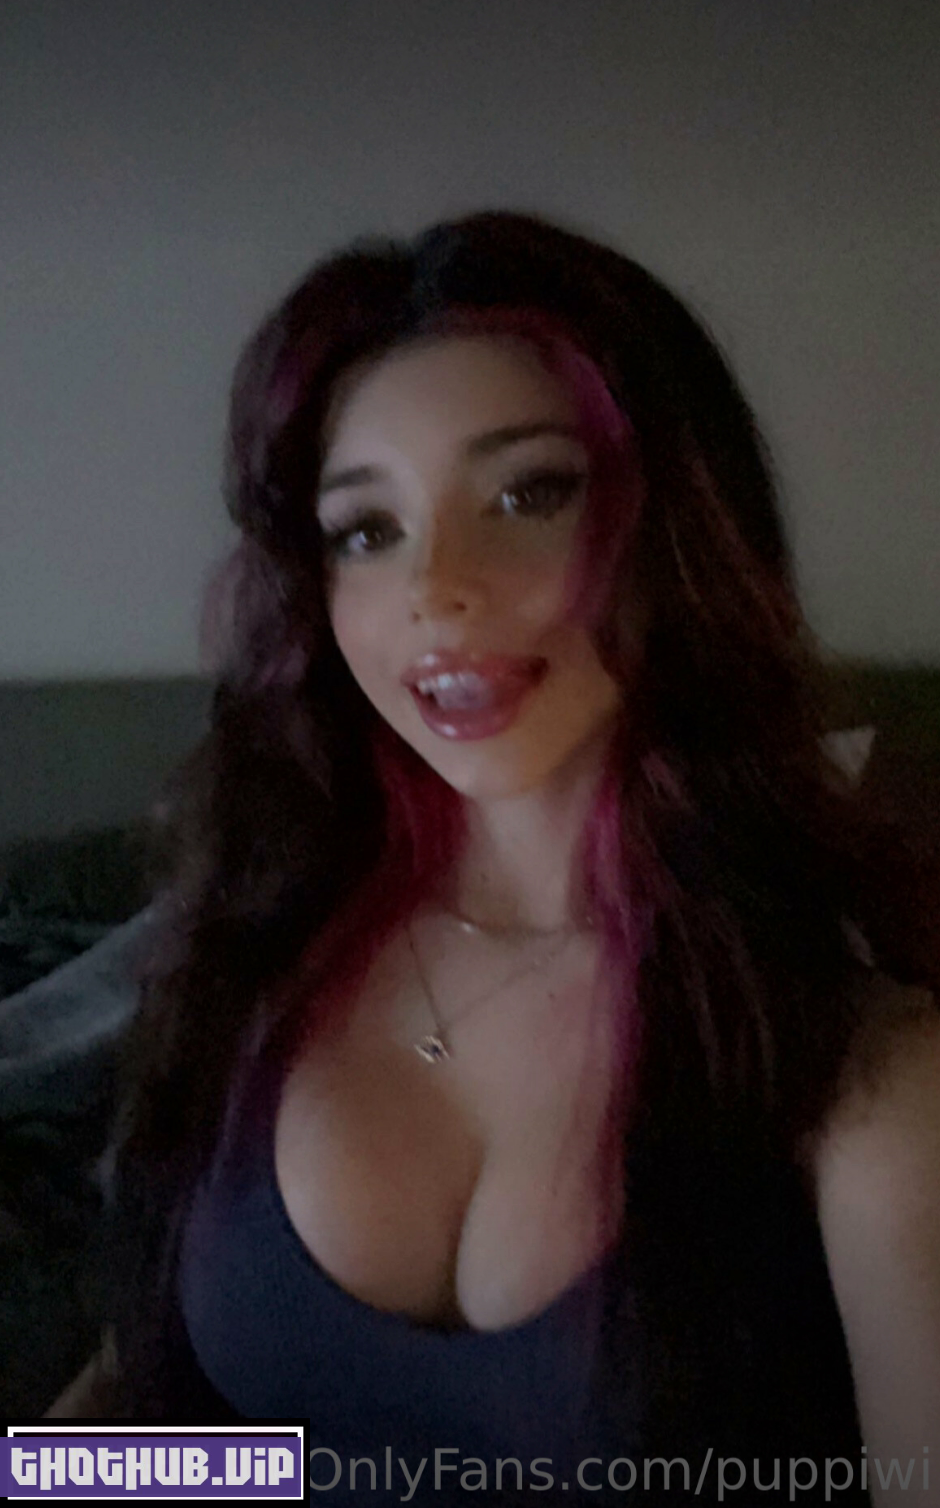 1706553682 844 Puppiwii %E2%80%93 Cute Petite Onlyfans Nudes